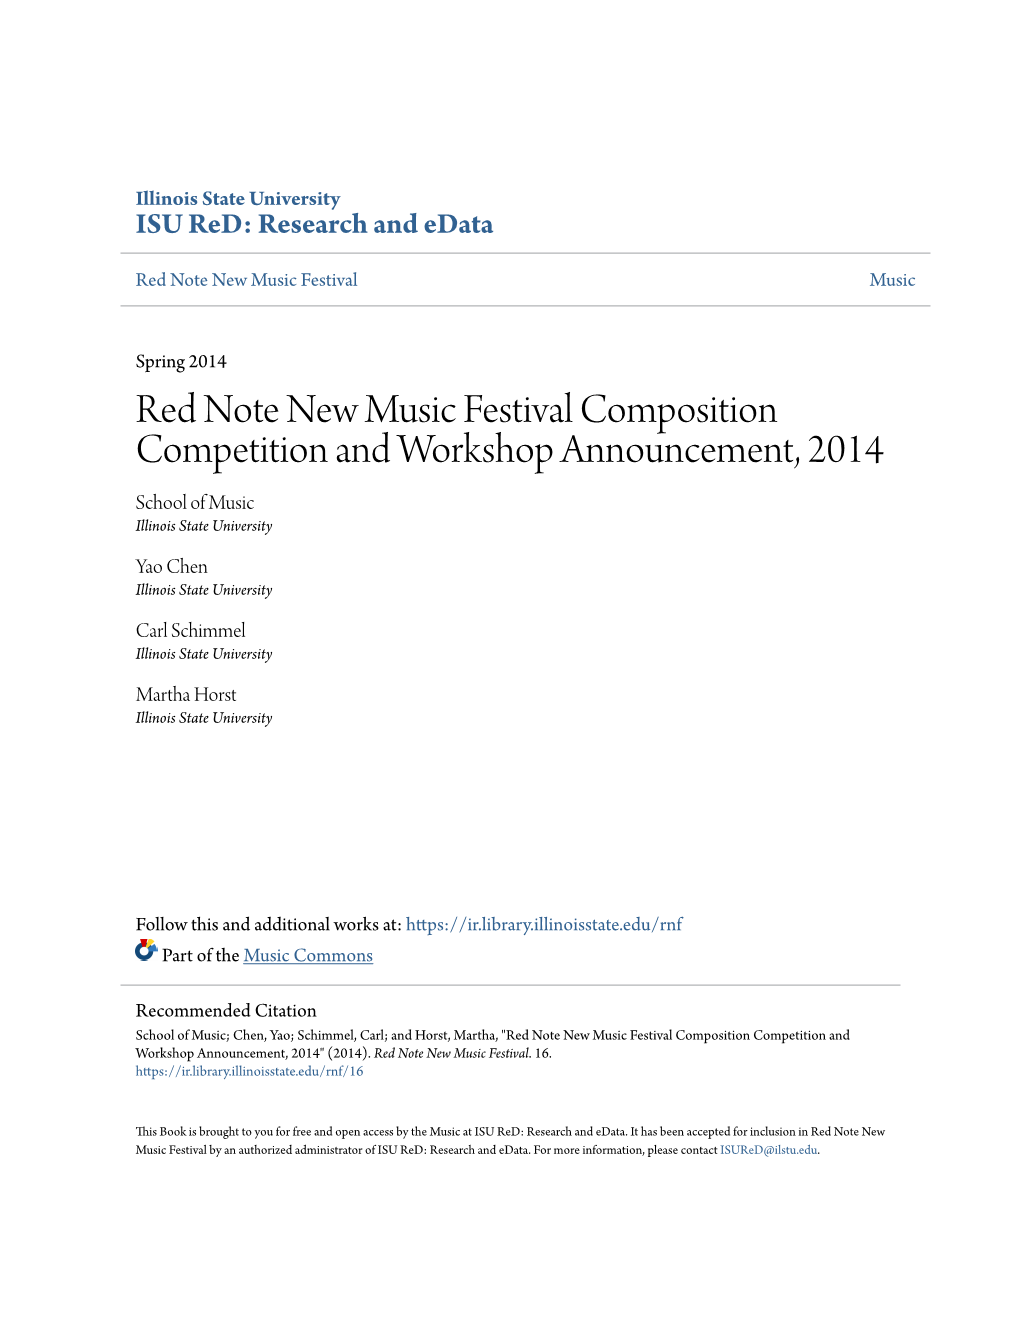 Red Note New Music Festival Composition Competition and Workshop Announcement, 2014 School of Music Illinois State University